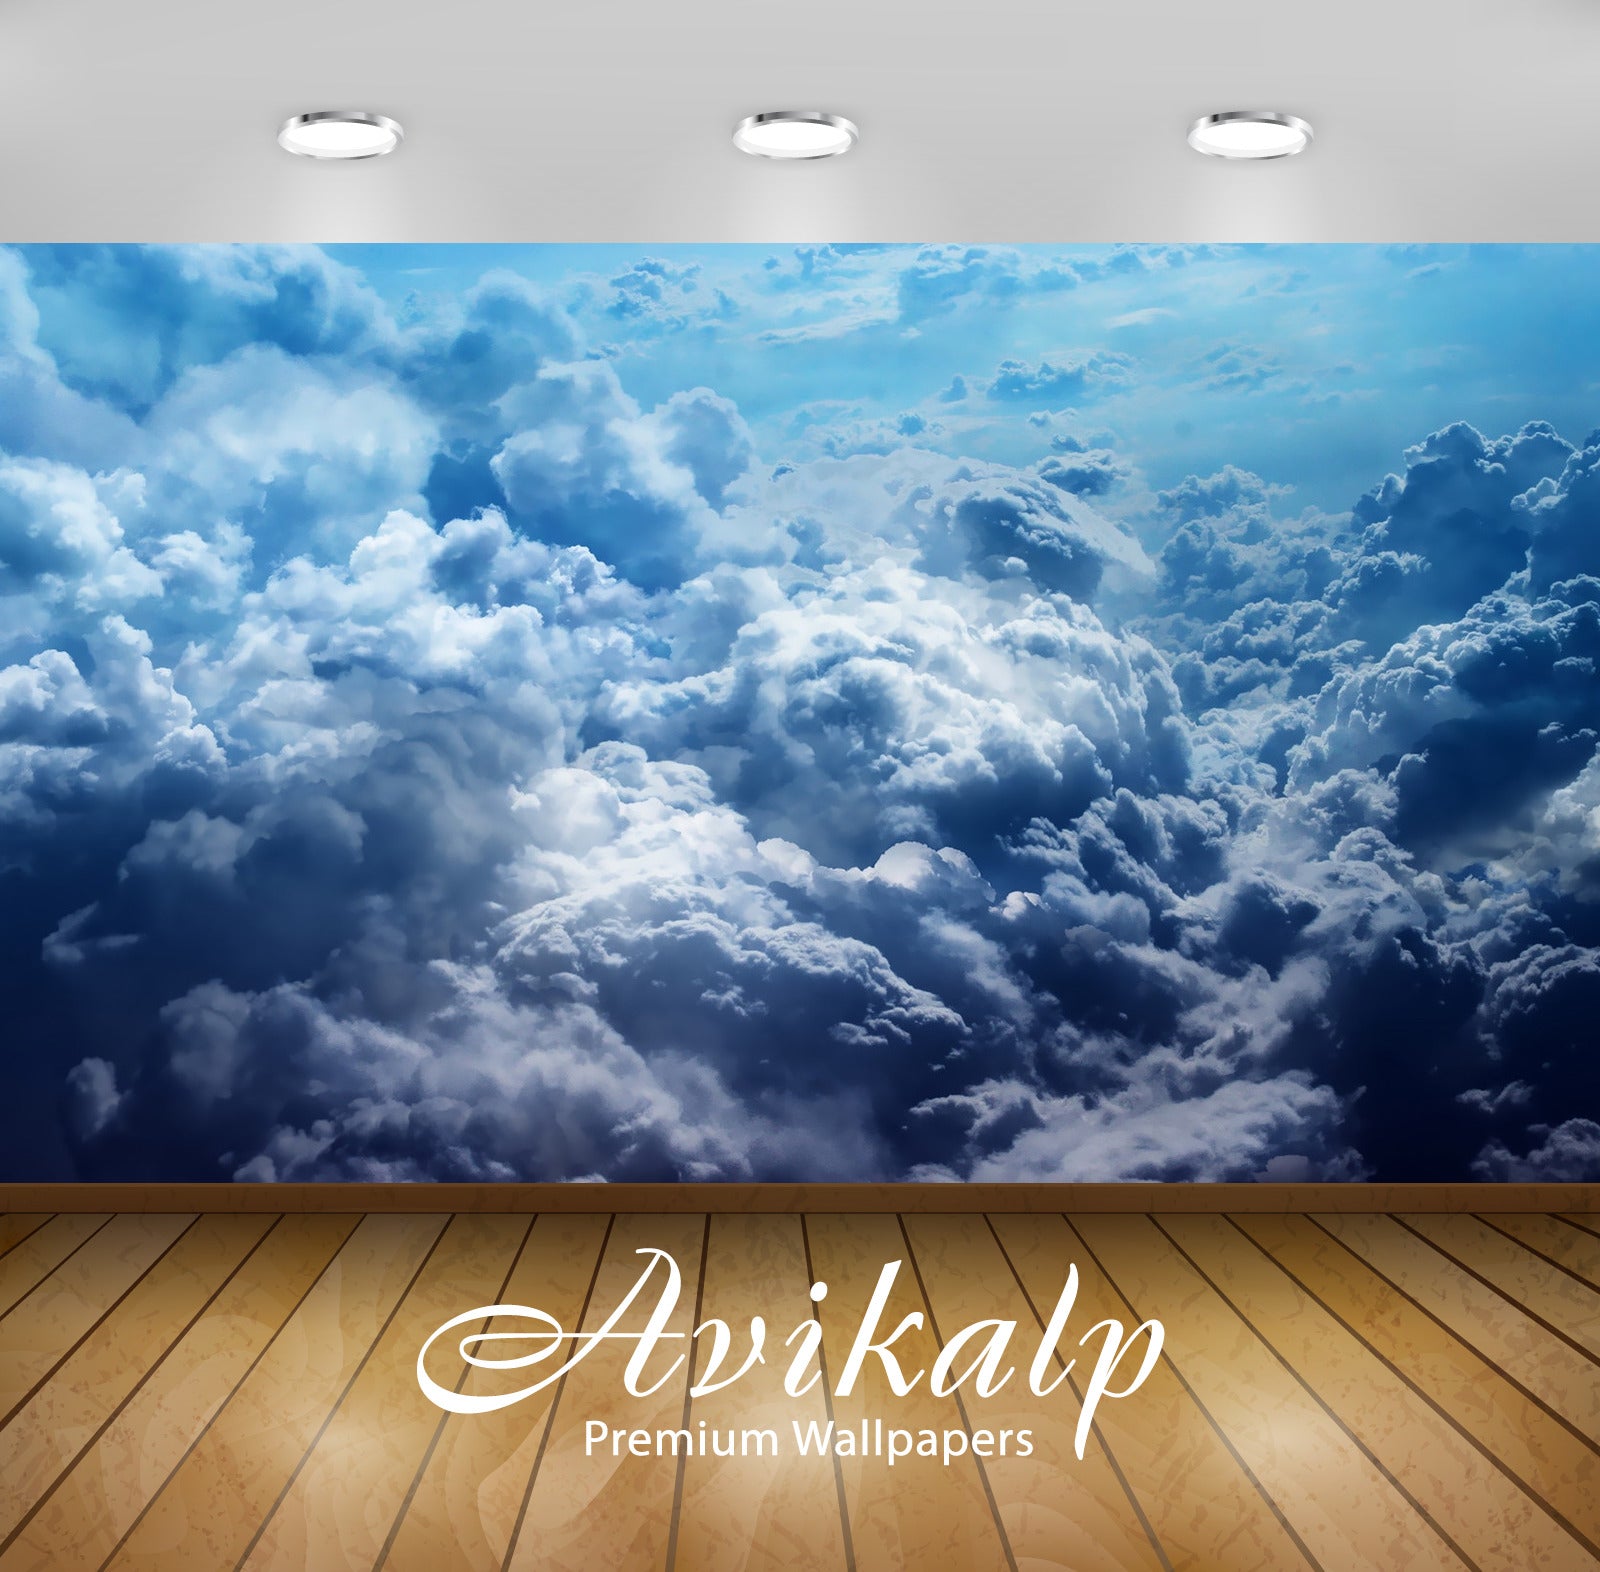 Avikalp Exclusive Awi1456 Amazing Clouds Full HD Wallpapers for Living room, Hall, Kids Room, Kitche